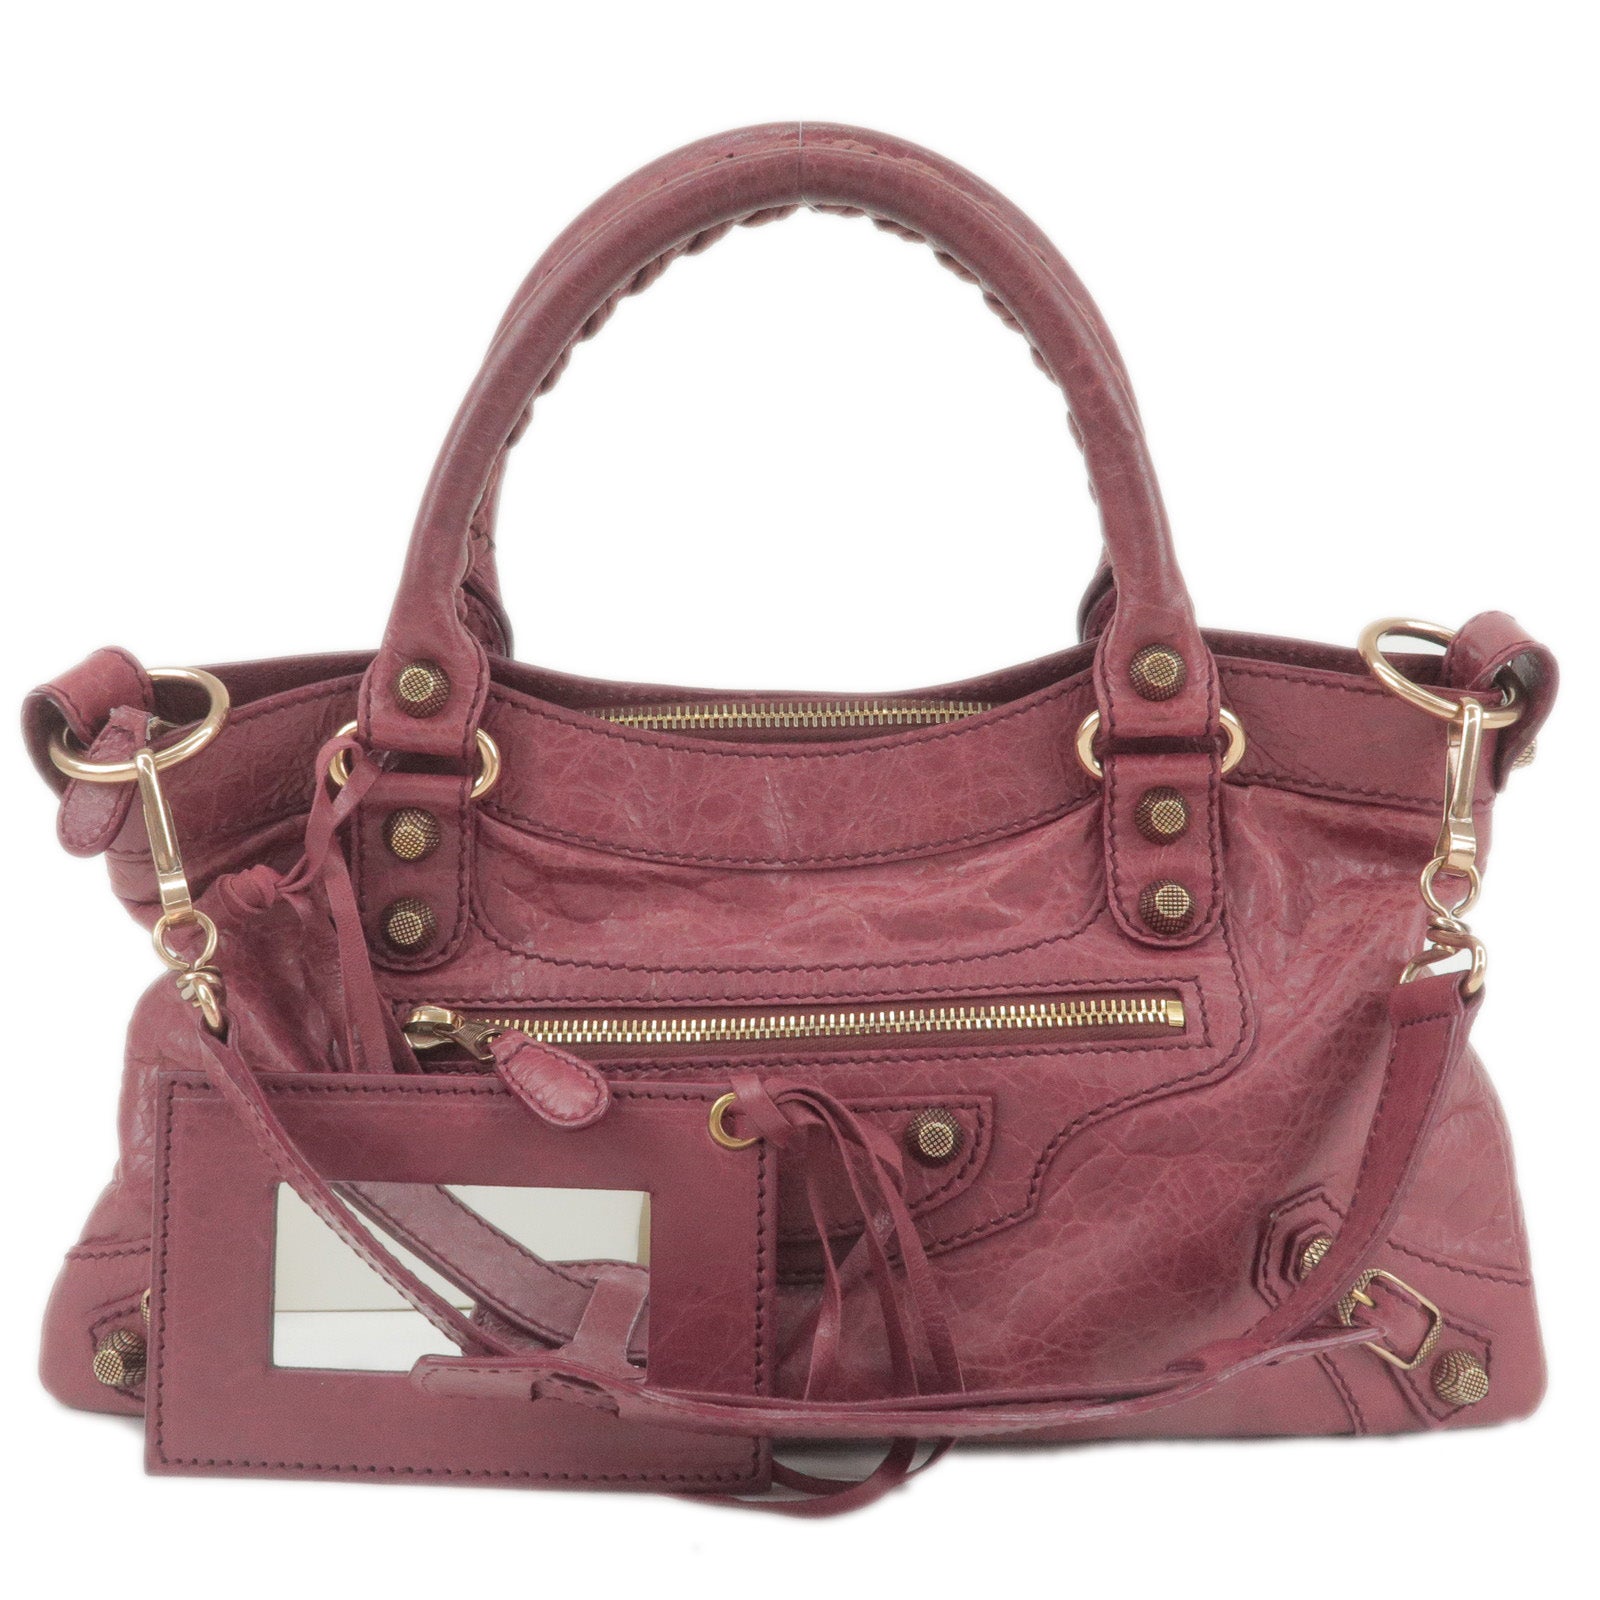 Leather multi-pouch cross body bag I WITTCHEN